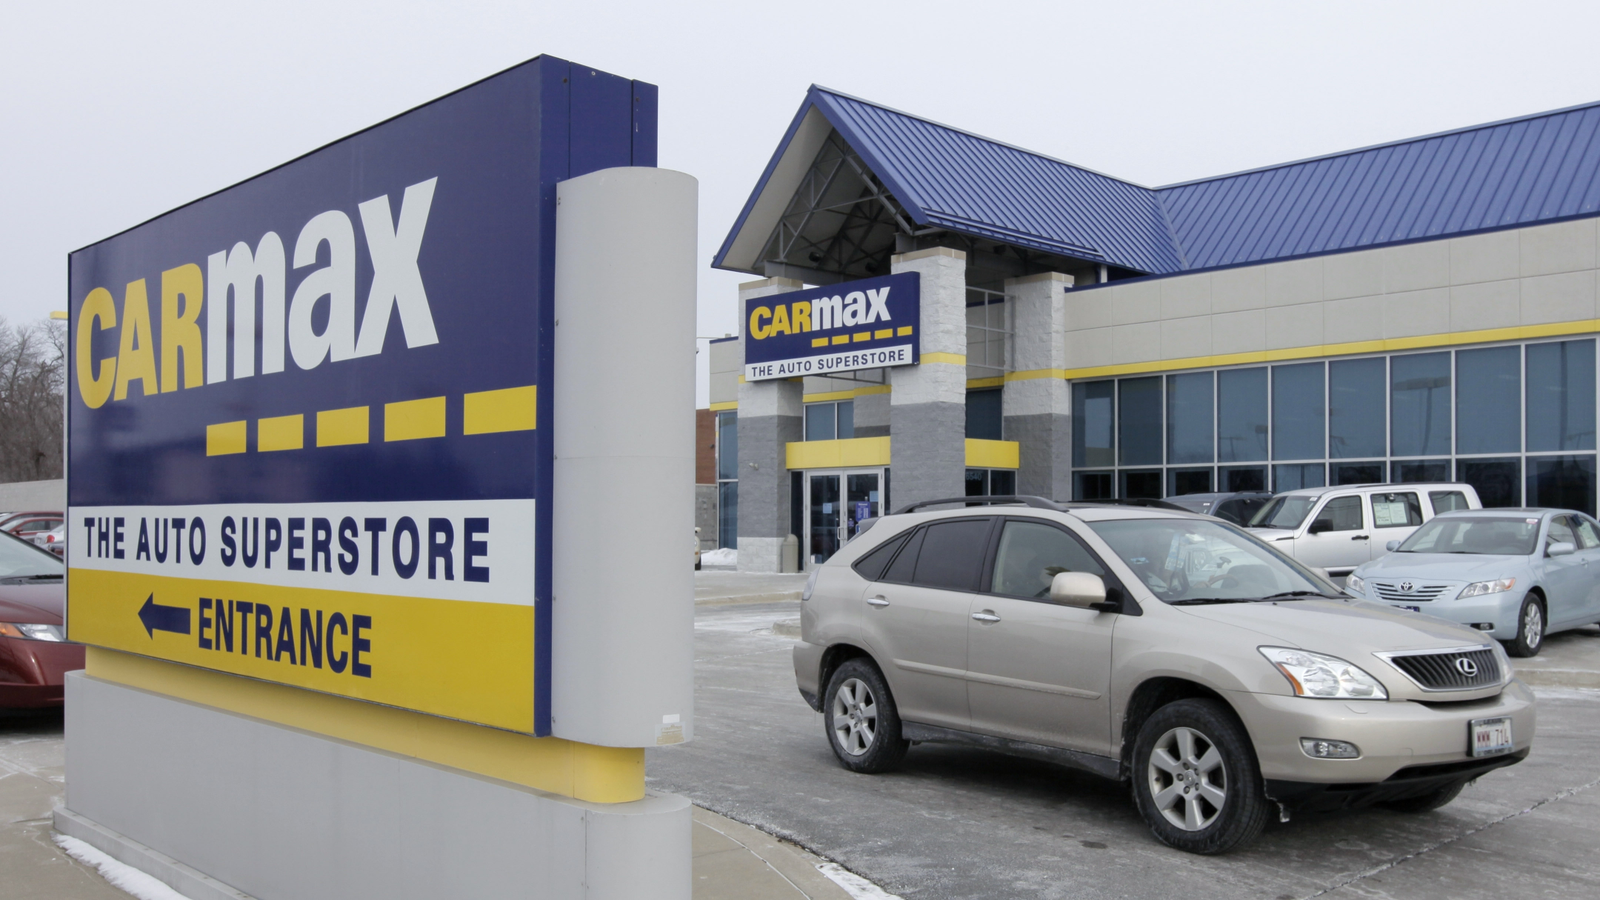 One In Four Cars Sold At CarMax Locations Had Open Safety Recalls UPDATED 